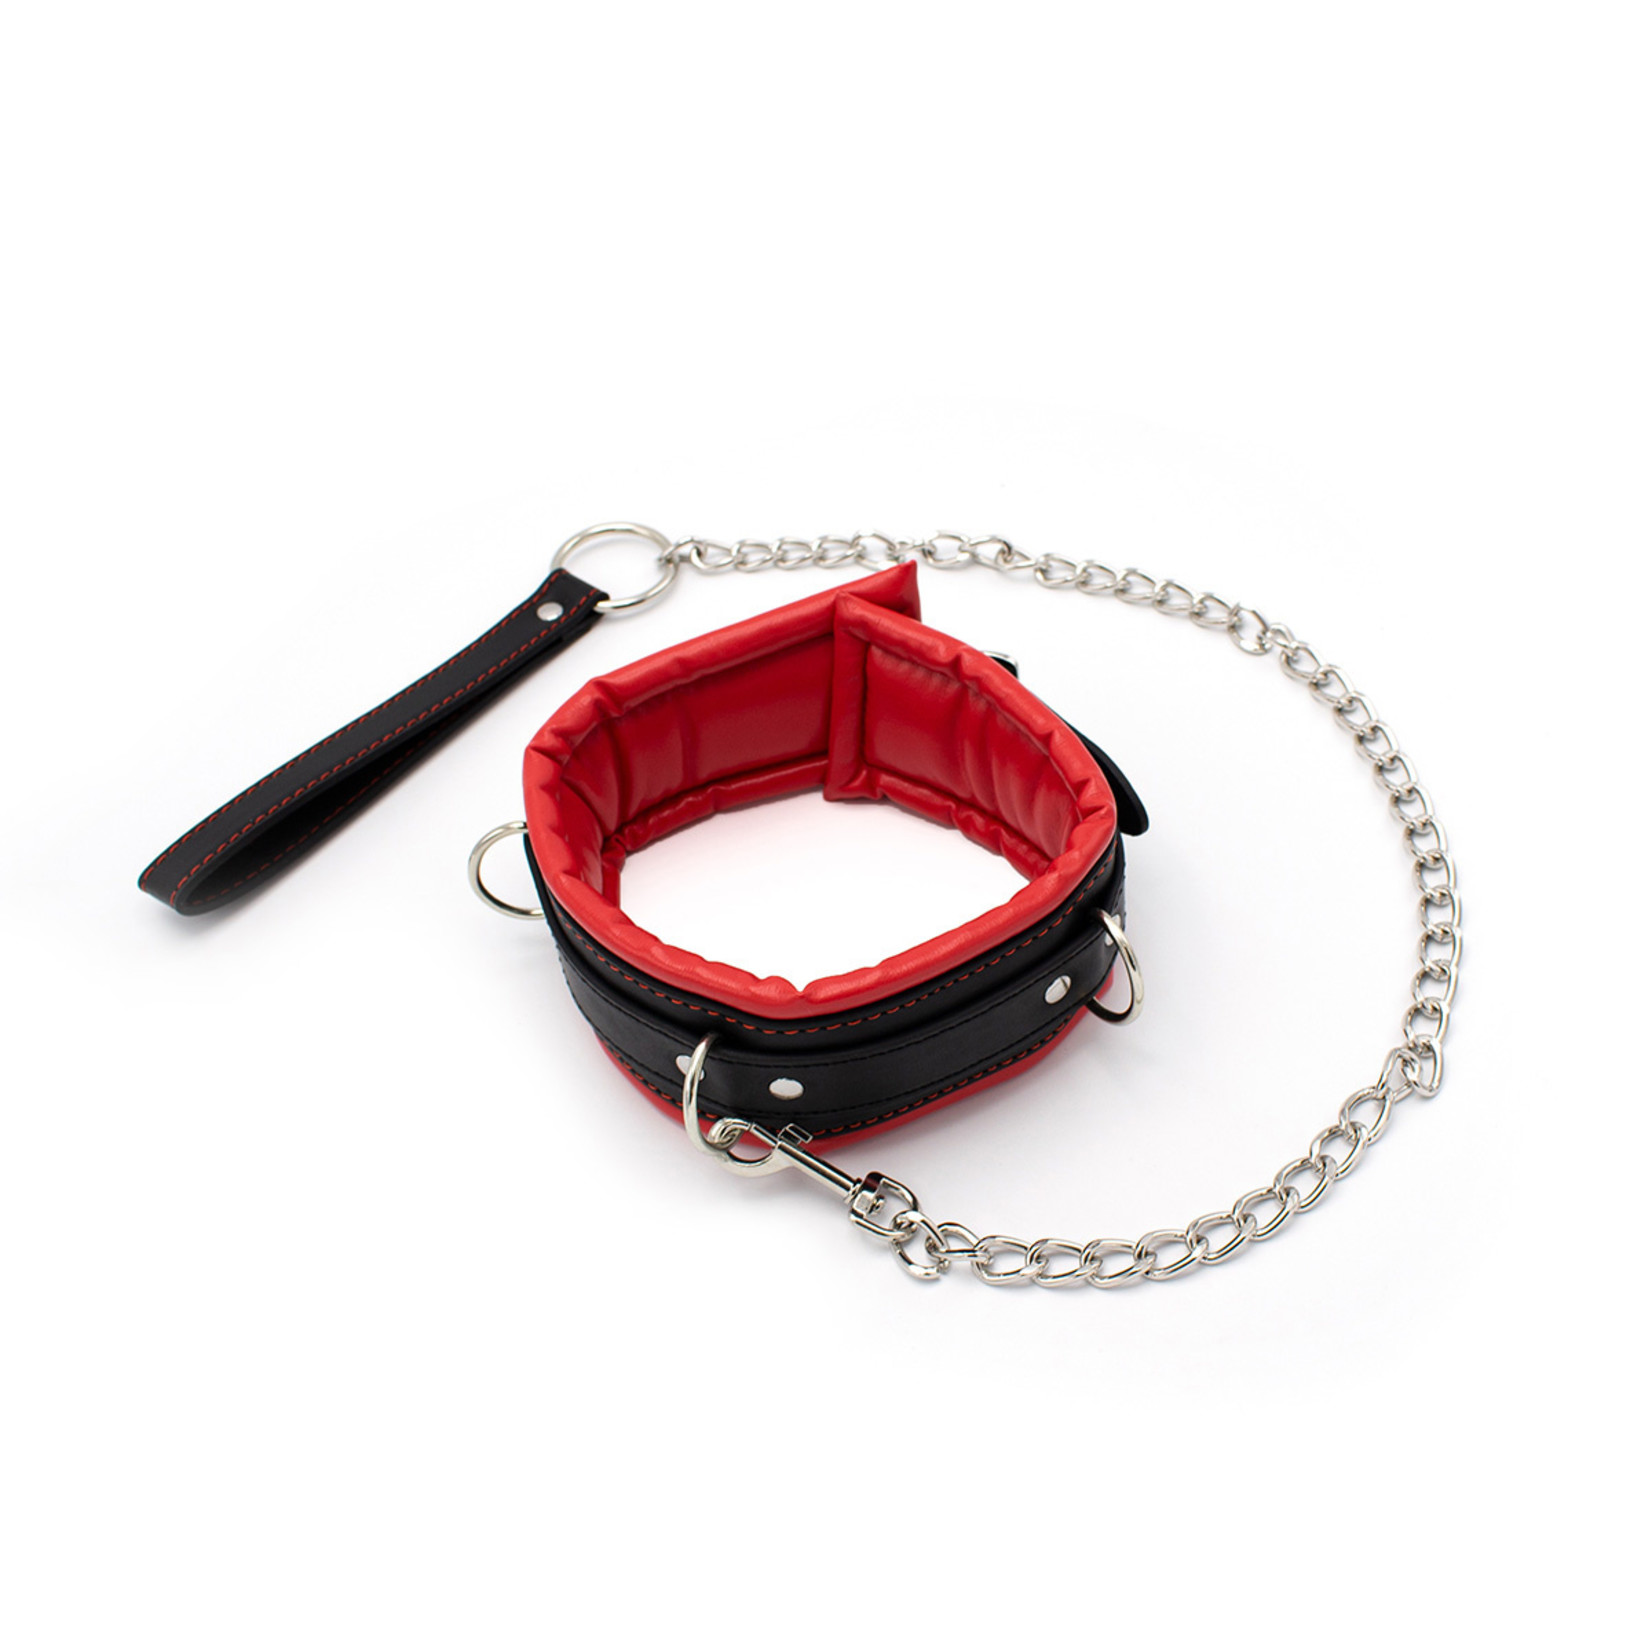 KIOTOS Leather Collar Red & Black with Leash